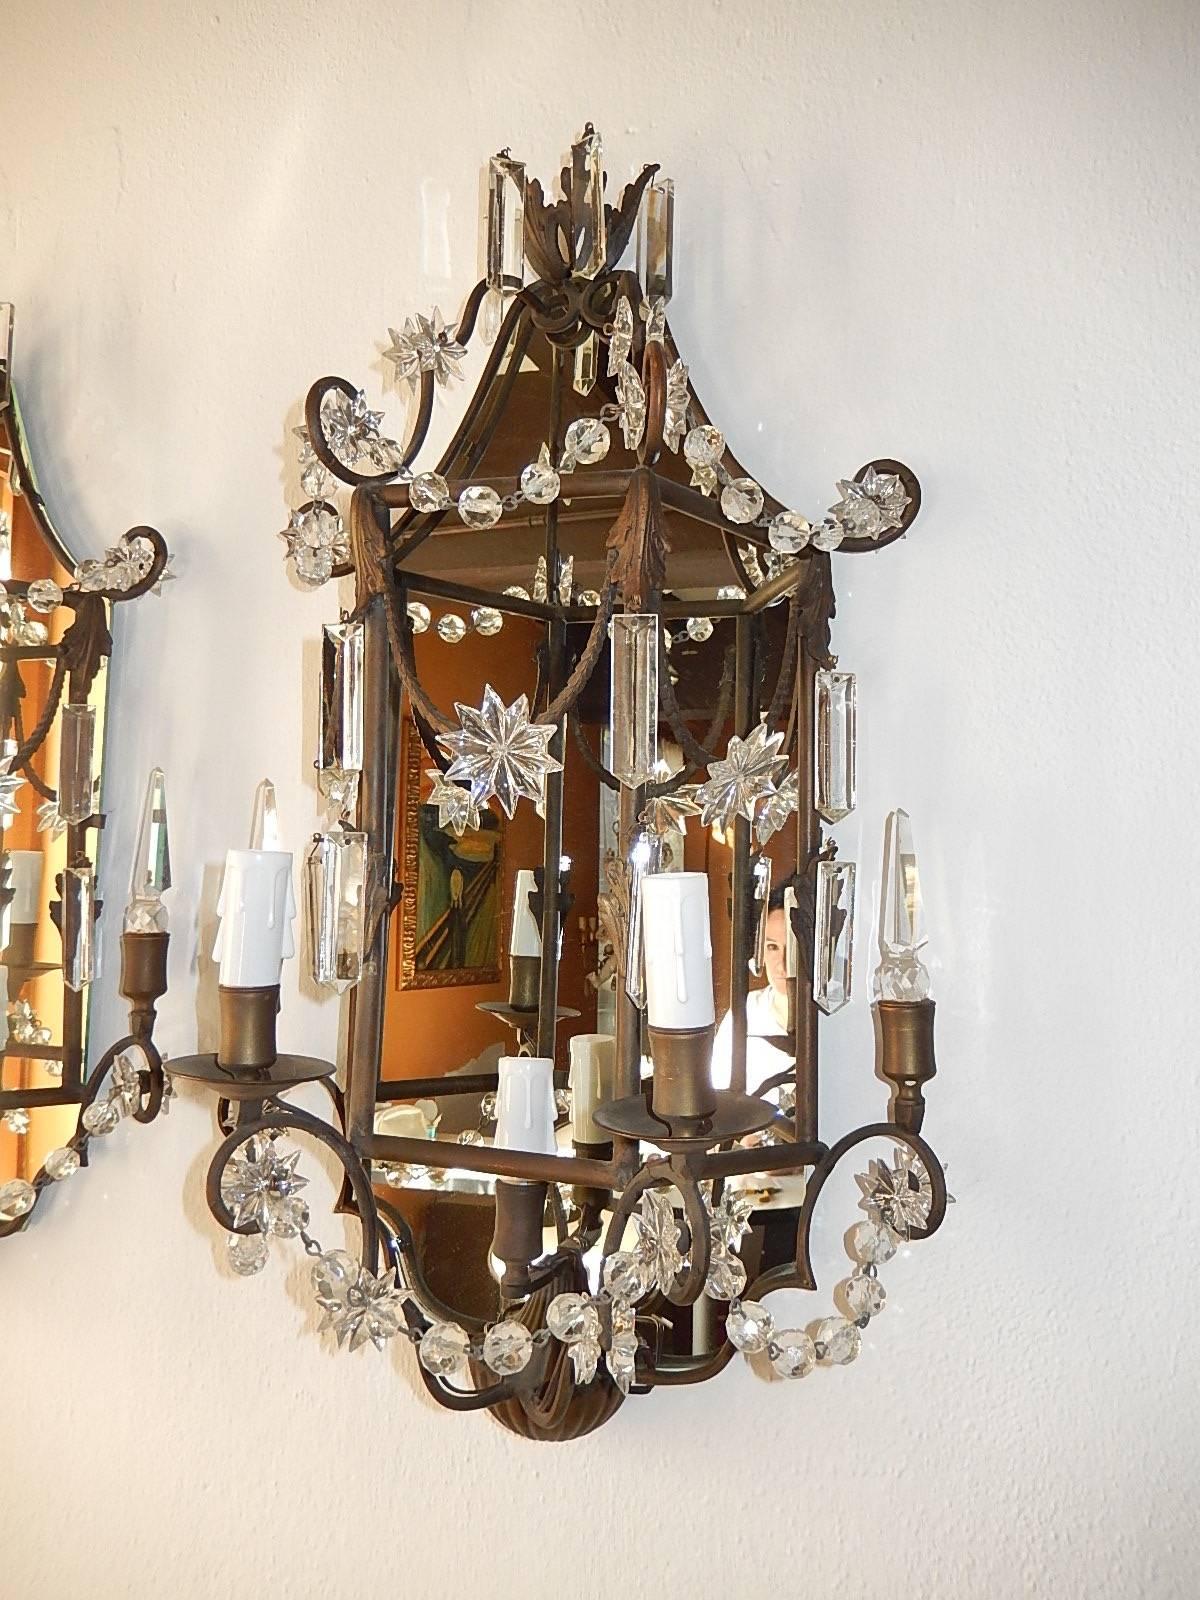 Early 20th Century 1900 French Mirror Sconces Crystal Spear and Stars